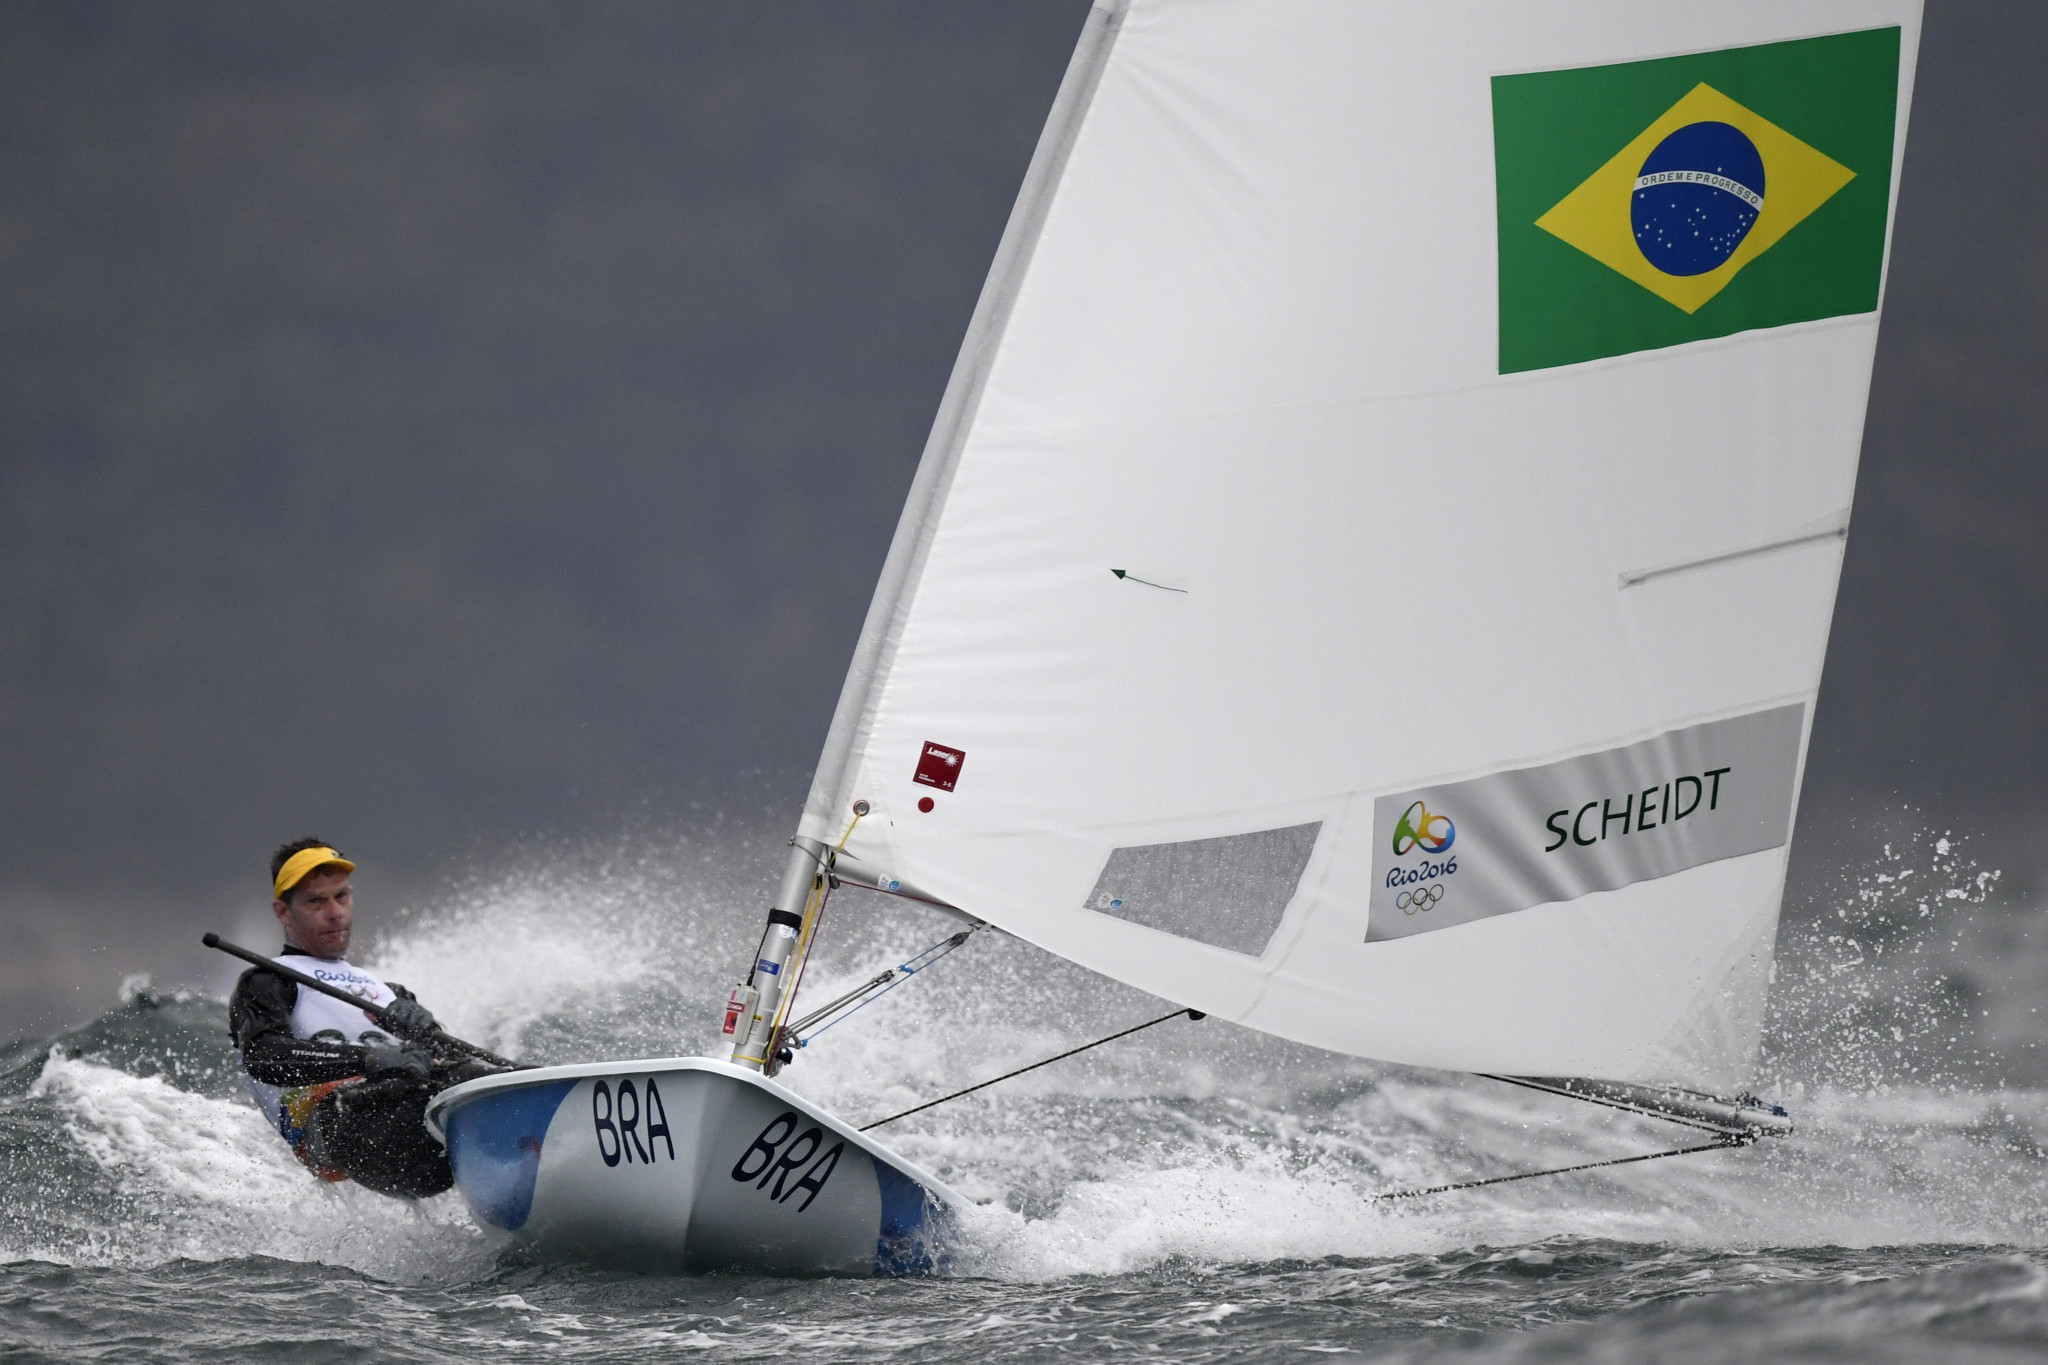 Robert Scheidt claimed the decision to retire from Olympic sailing was one of the most difficult he has ever made ©Getty Images